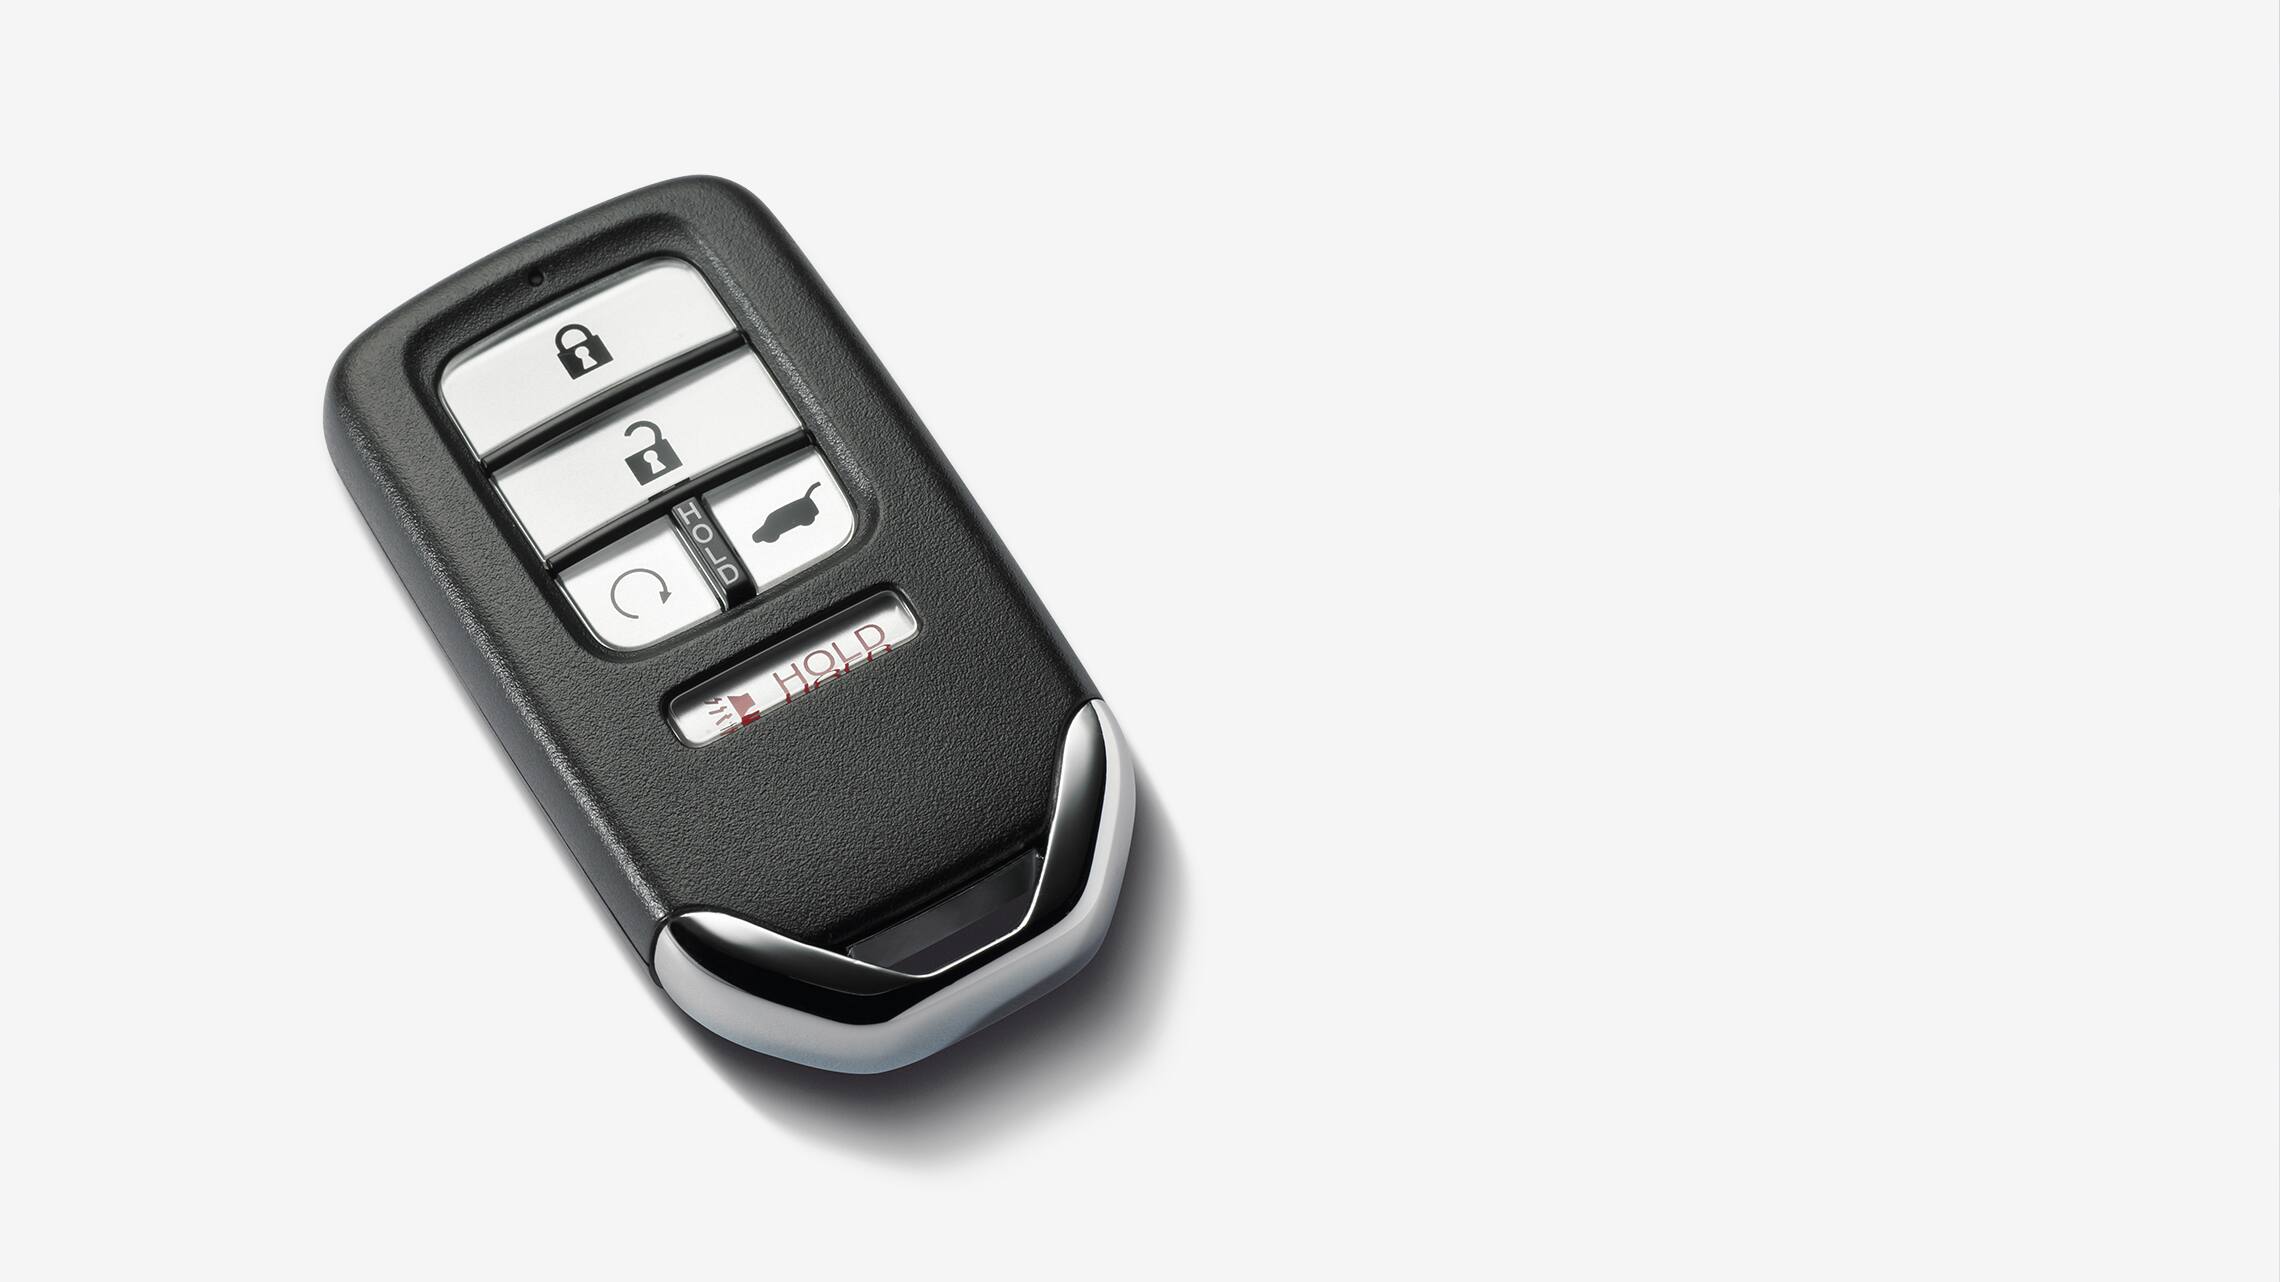 2019 Honda CR-V key fob with Smart Entry feature.